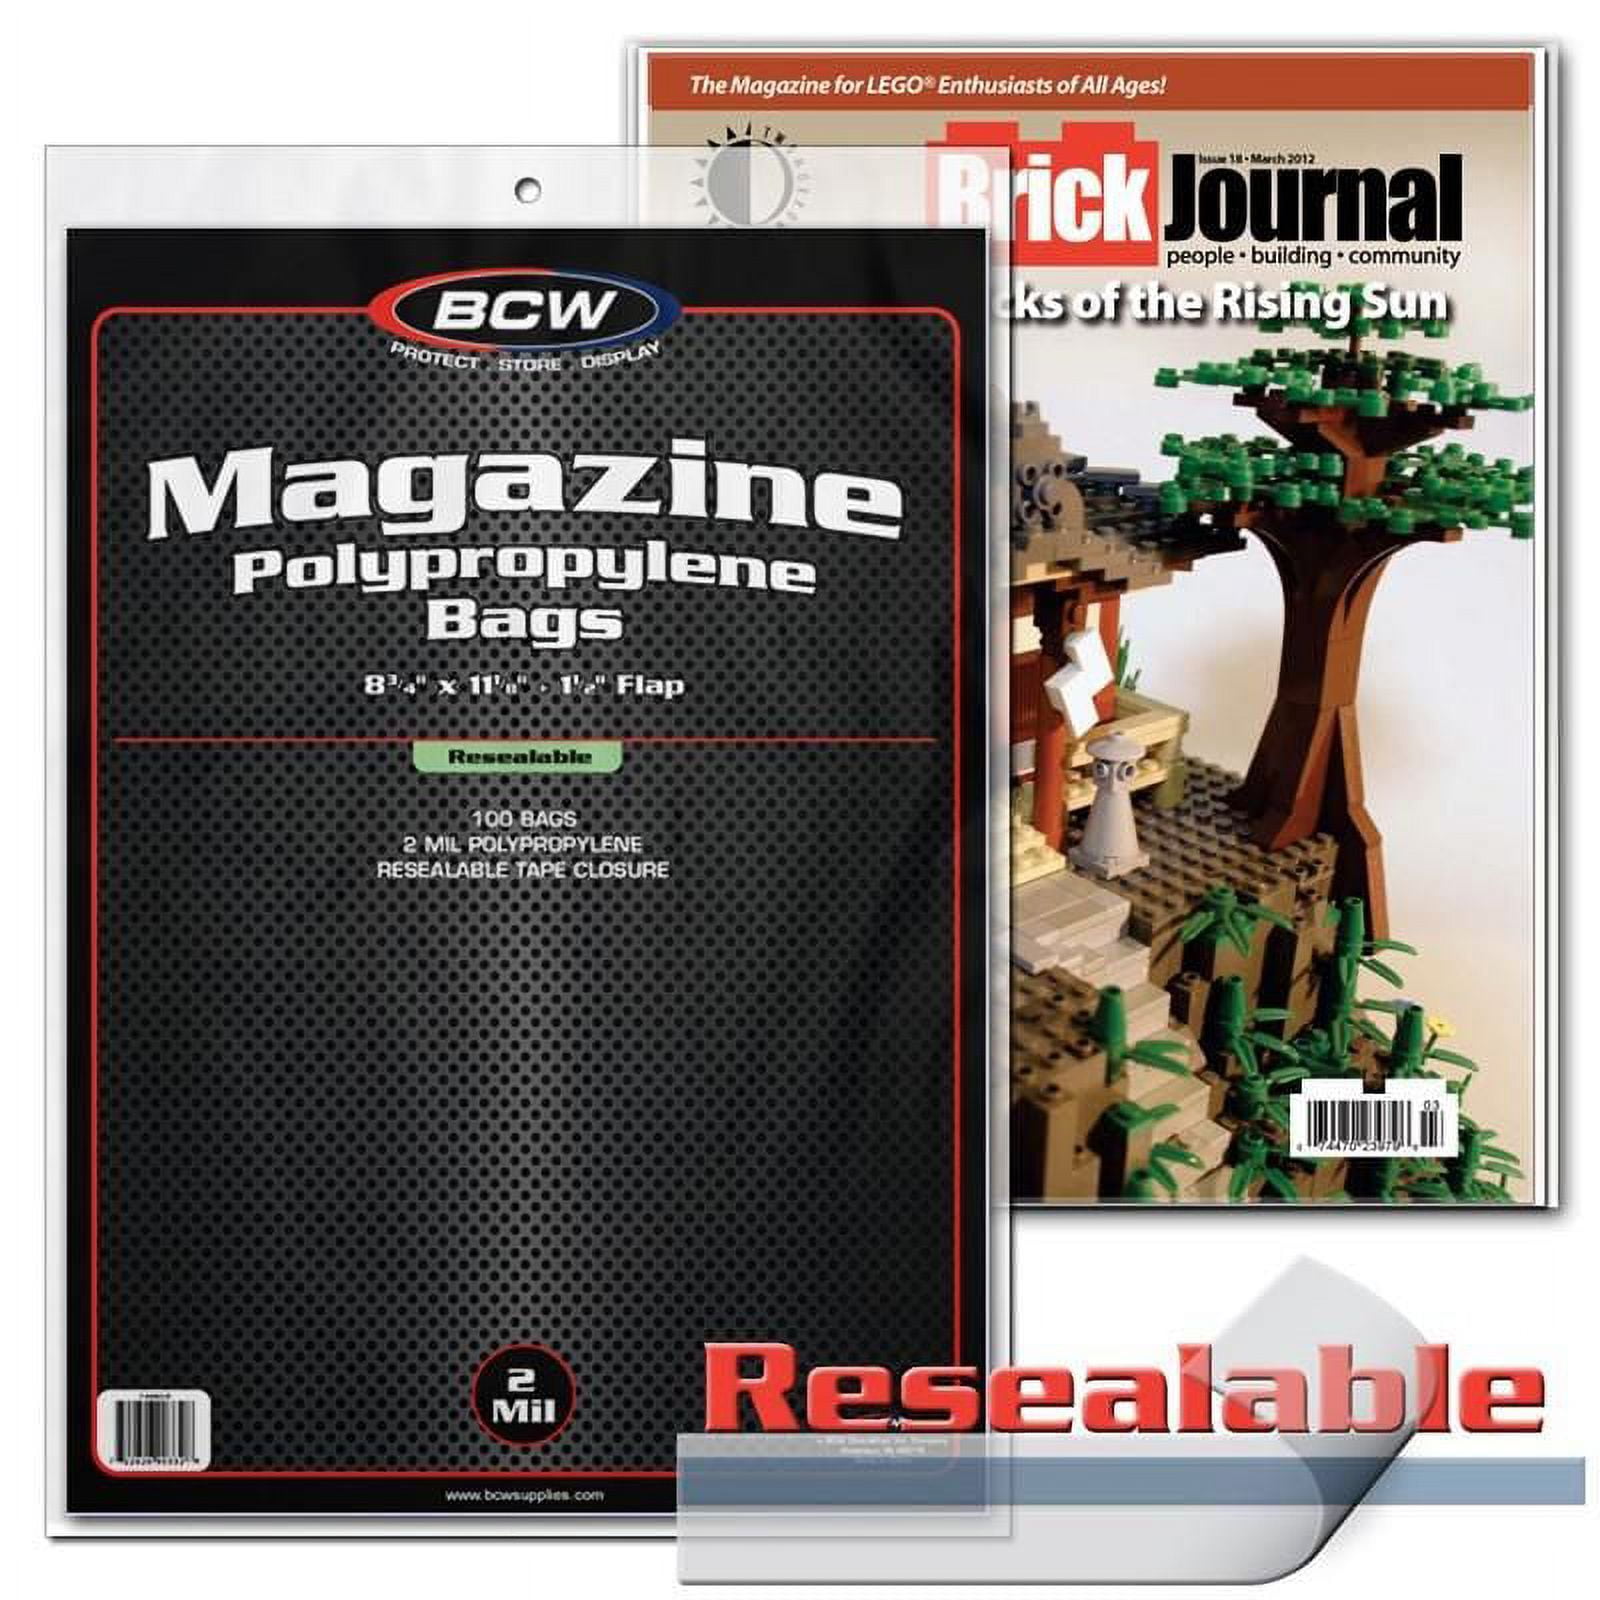 100 BCW MAGAZINE RESEALABLE BAGS - 8 3/4 x 11 1/8 